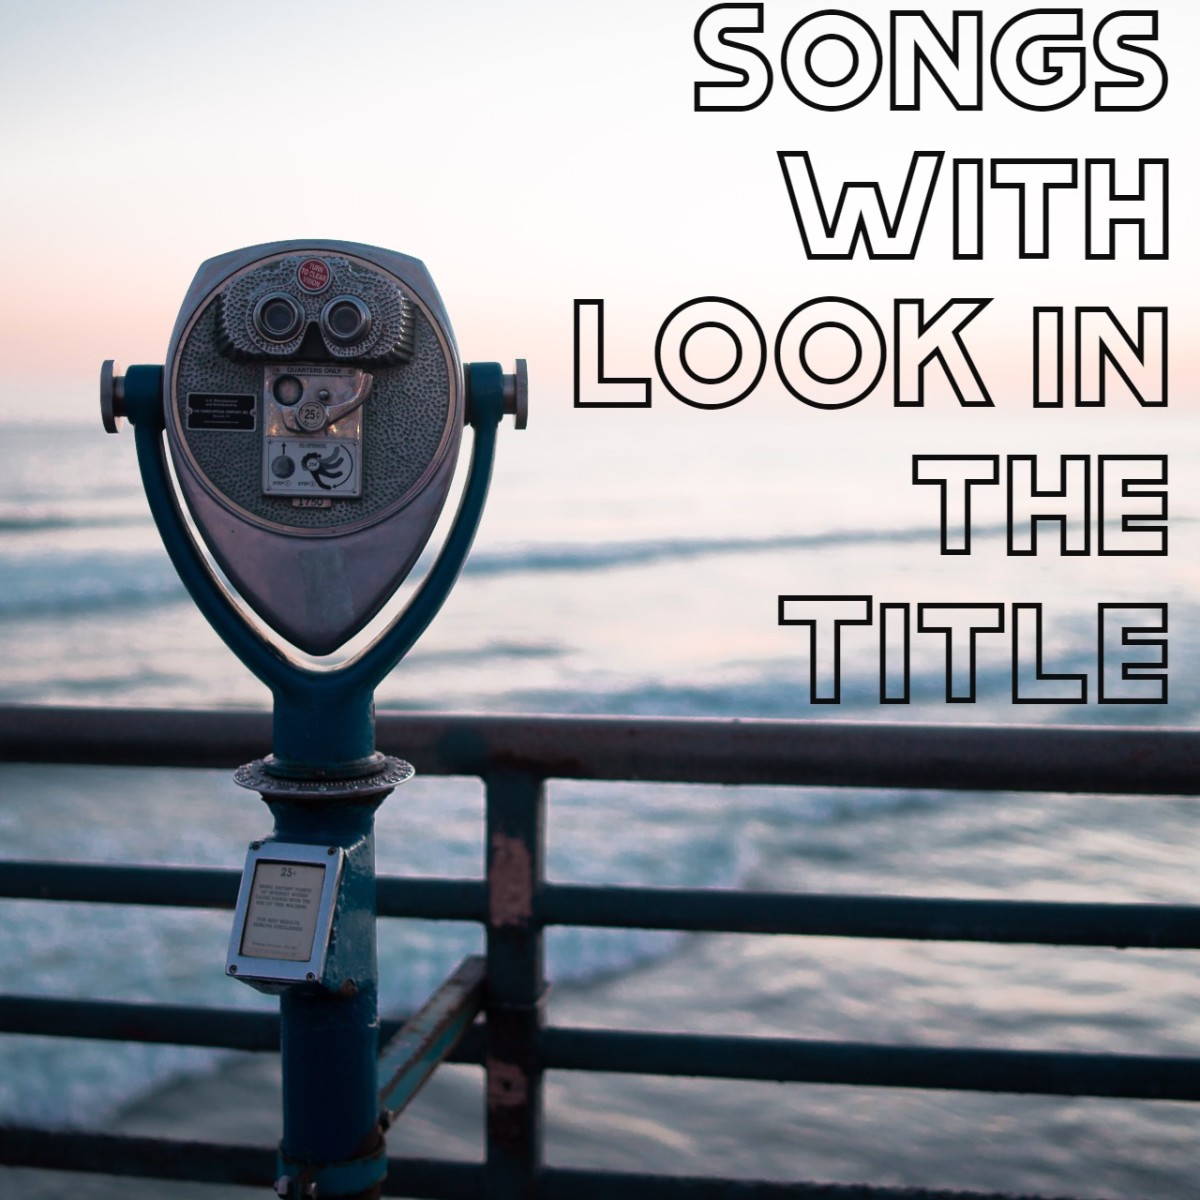 68 Songs With Look in the Title